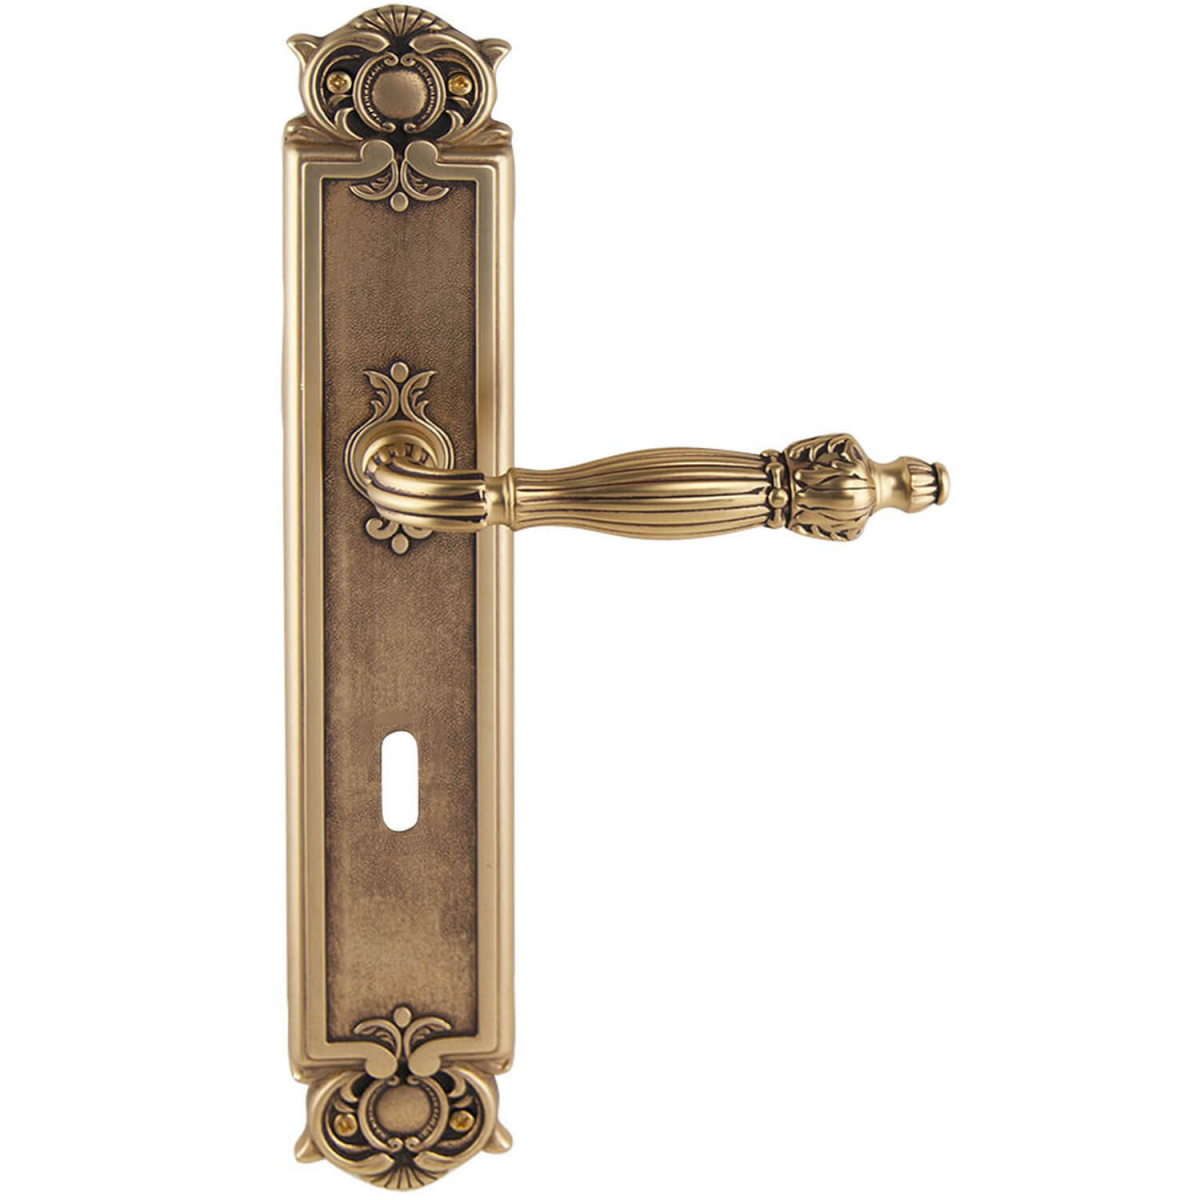 27 Awesome Exterior door handle backplate Trend in This Years